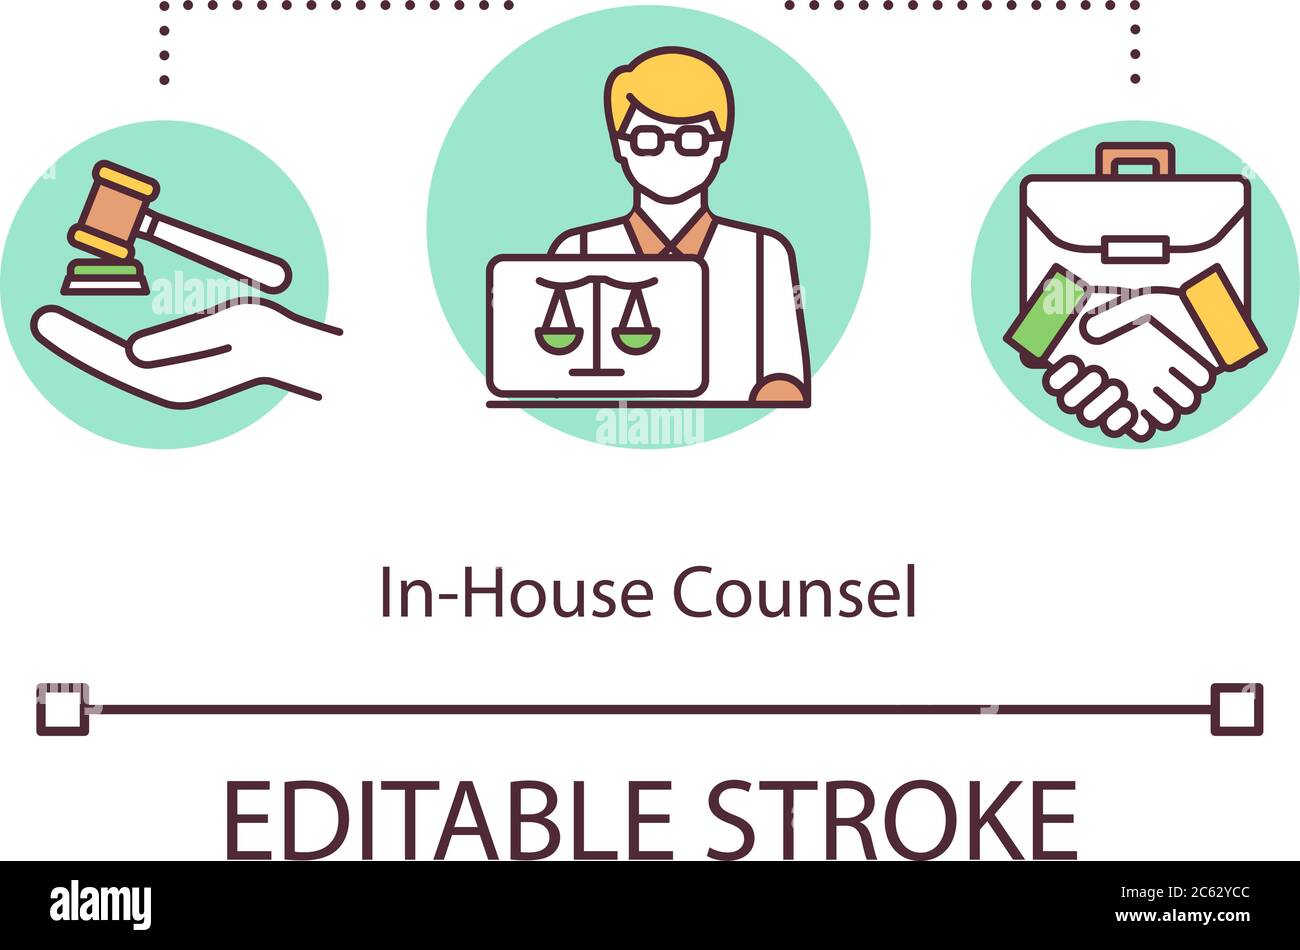 In house counsel concept icon Stock Vector